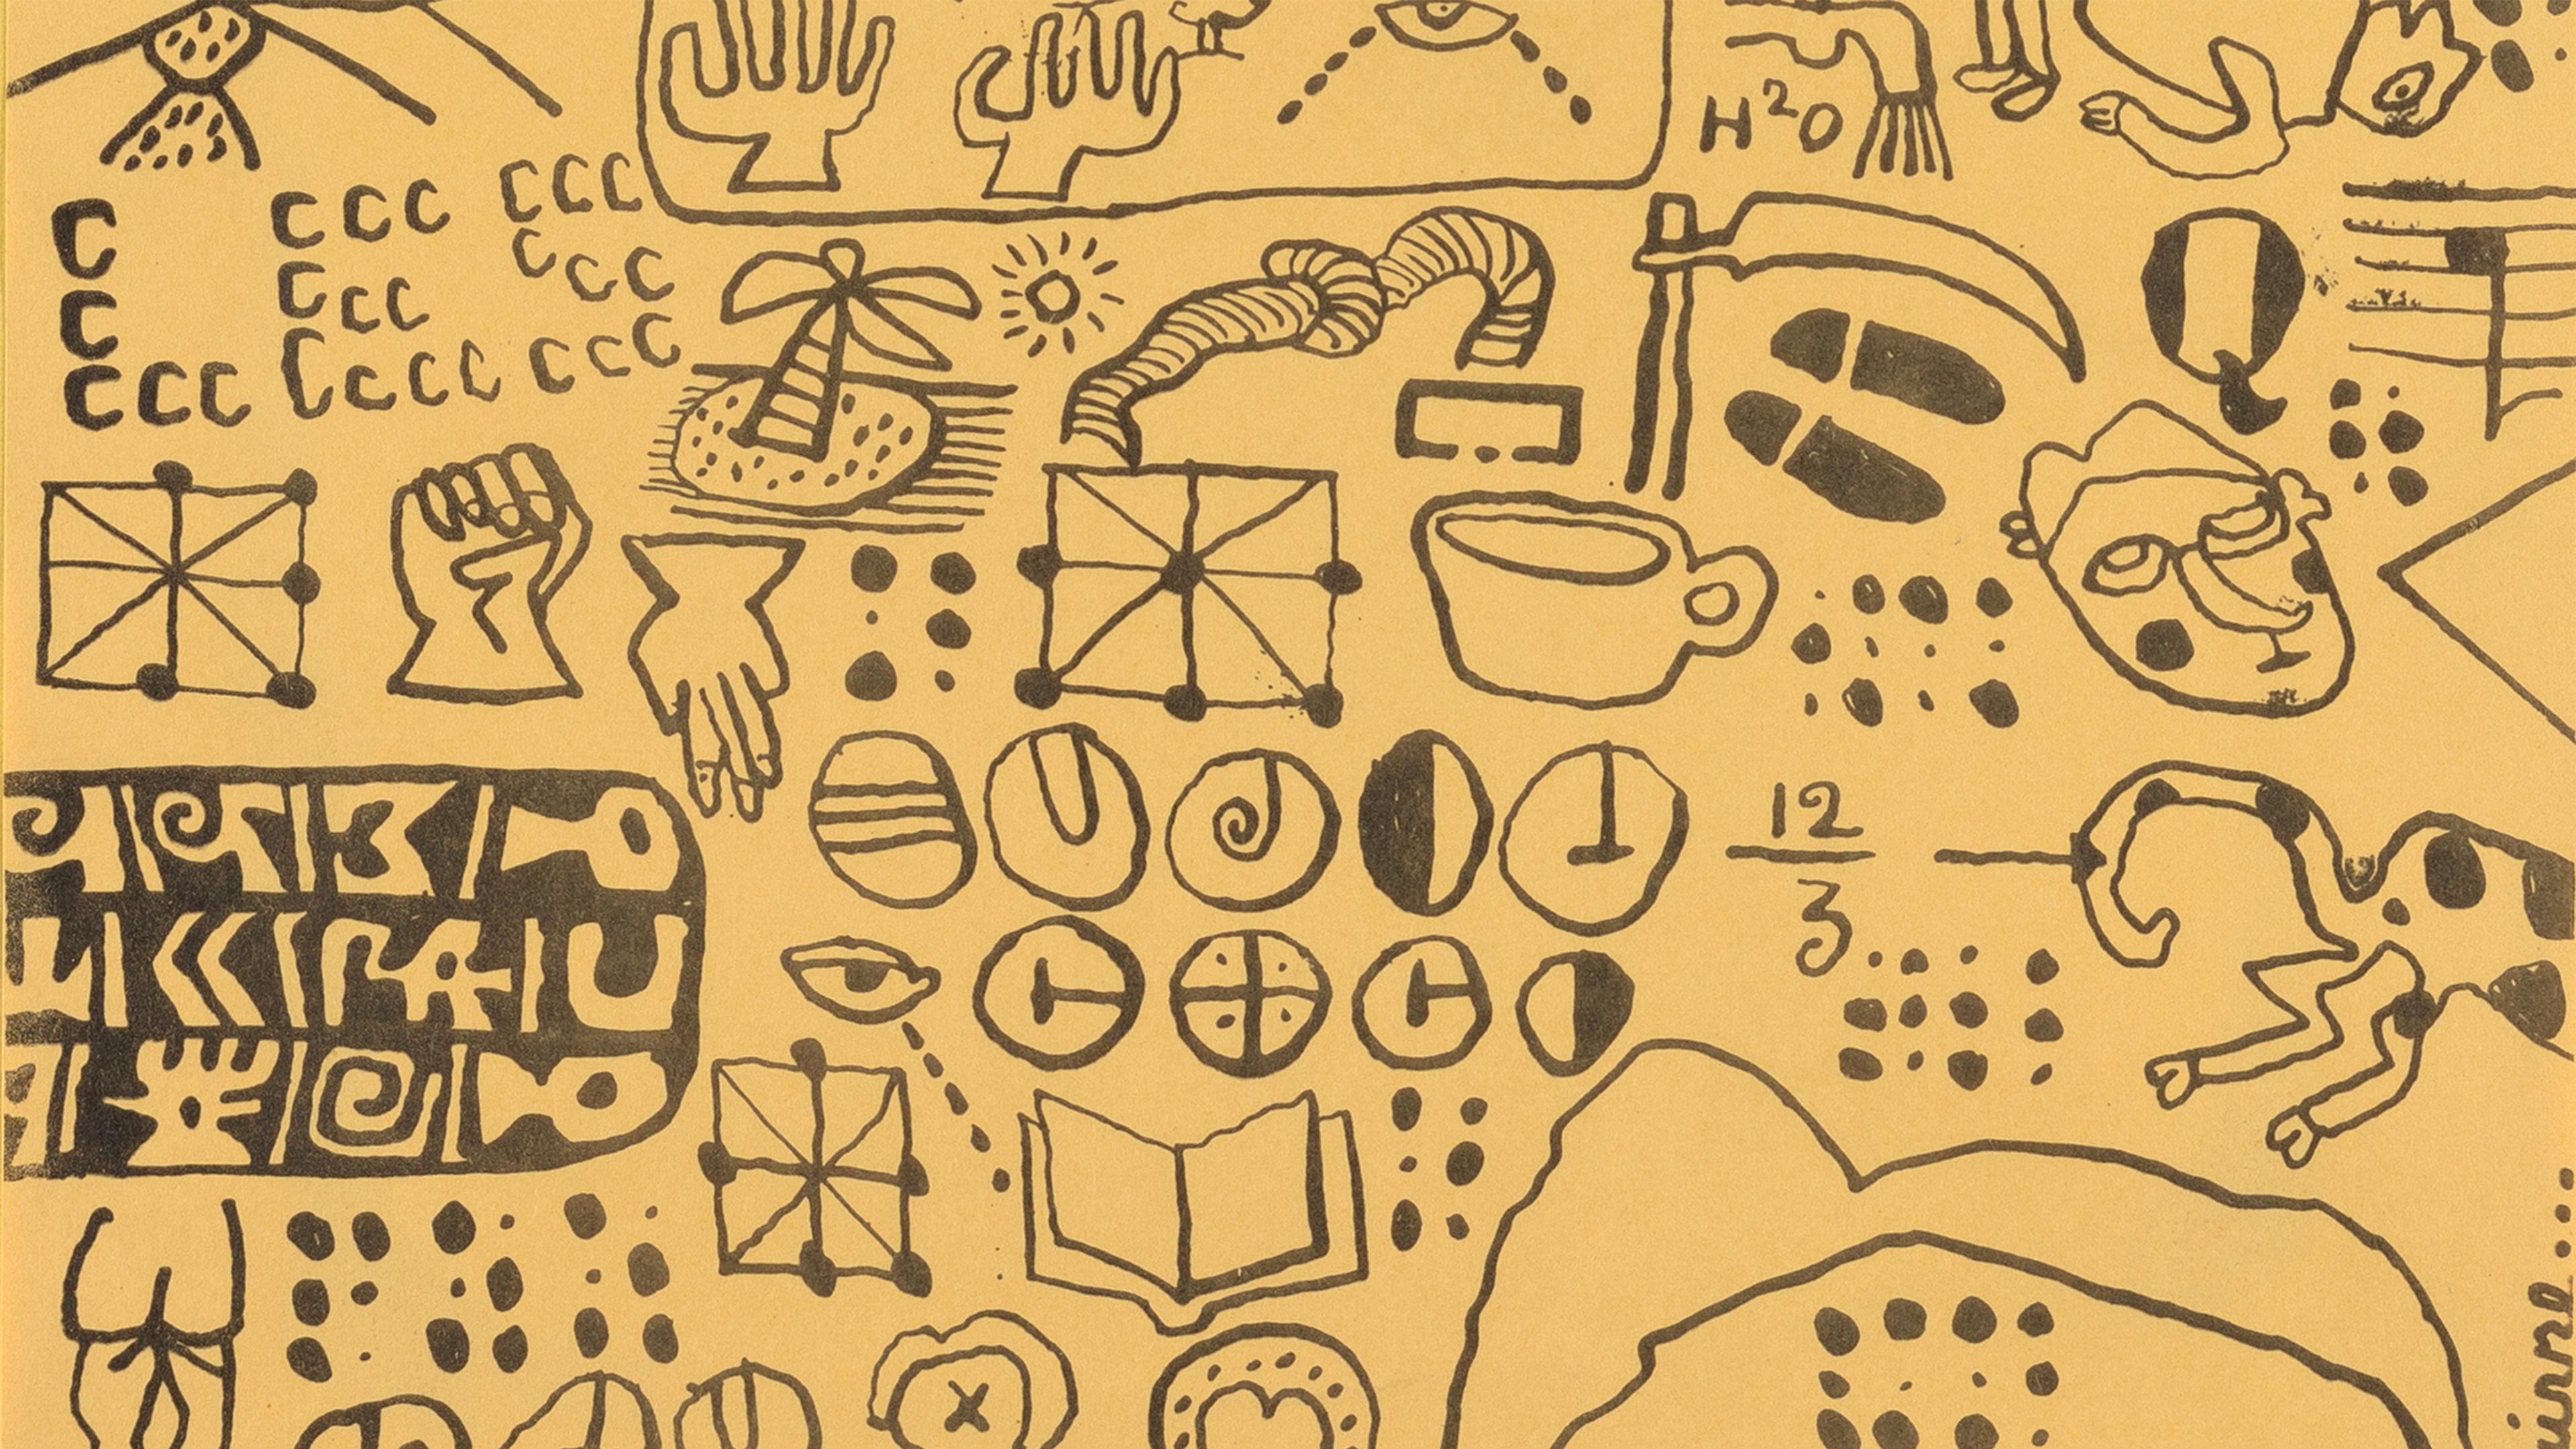 Various drawings onto a yellow background